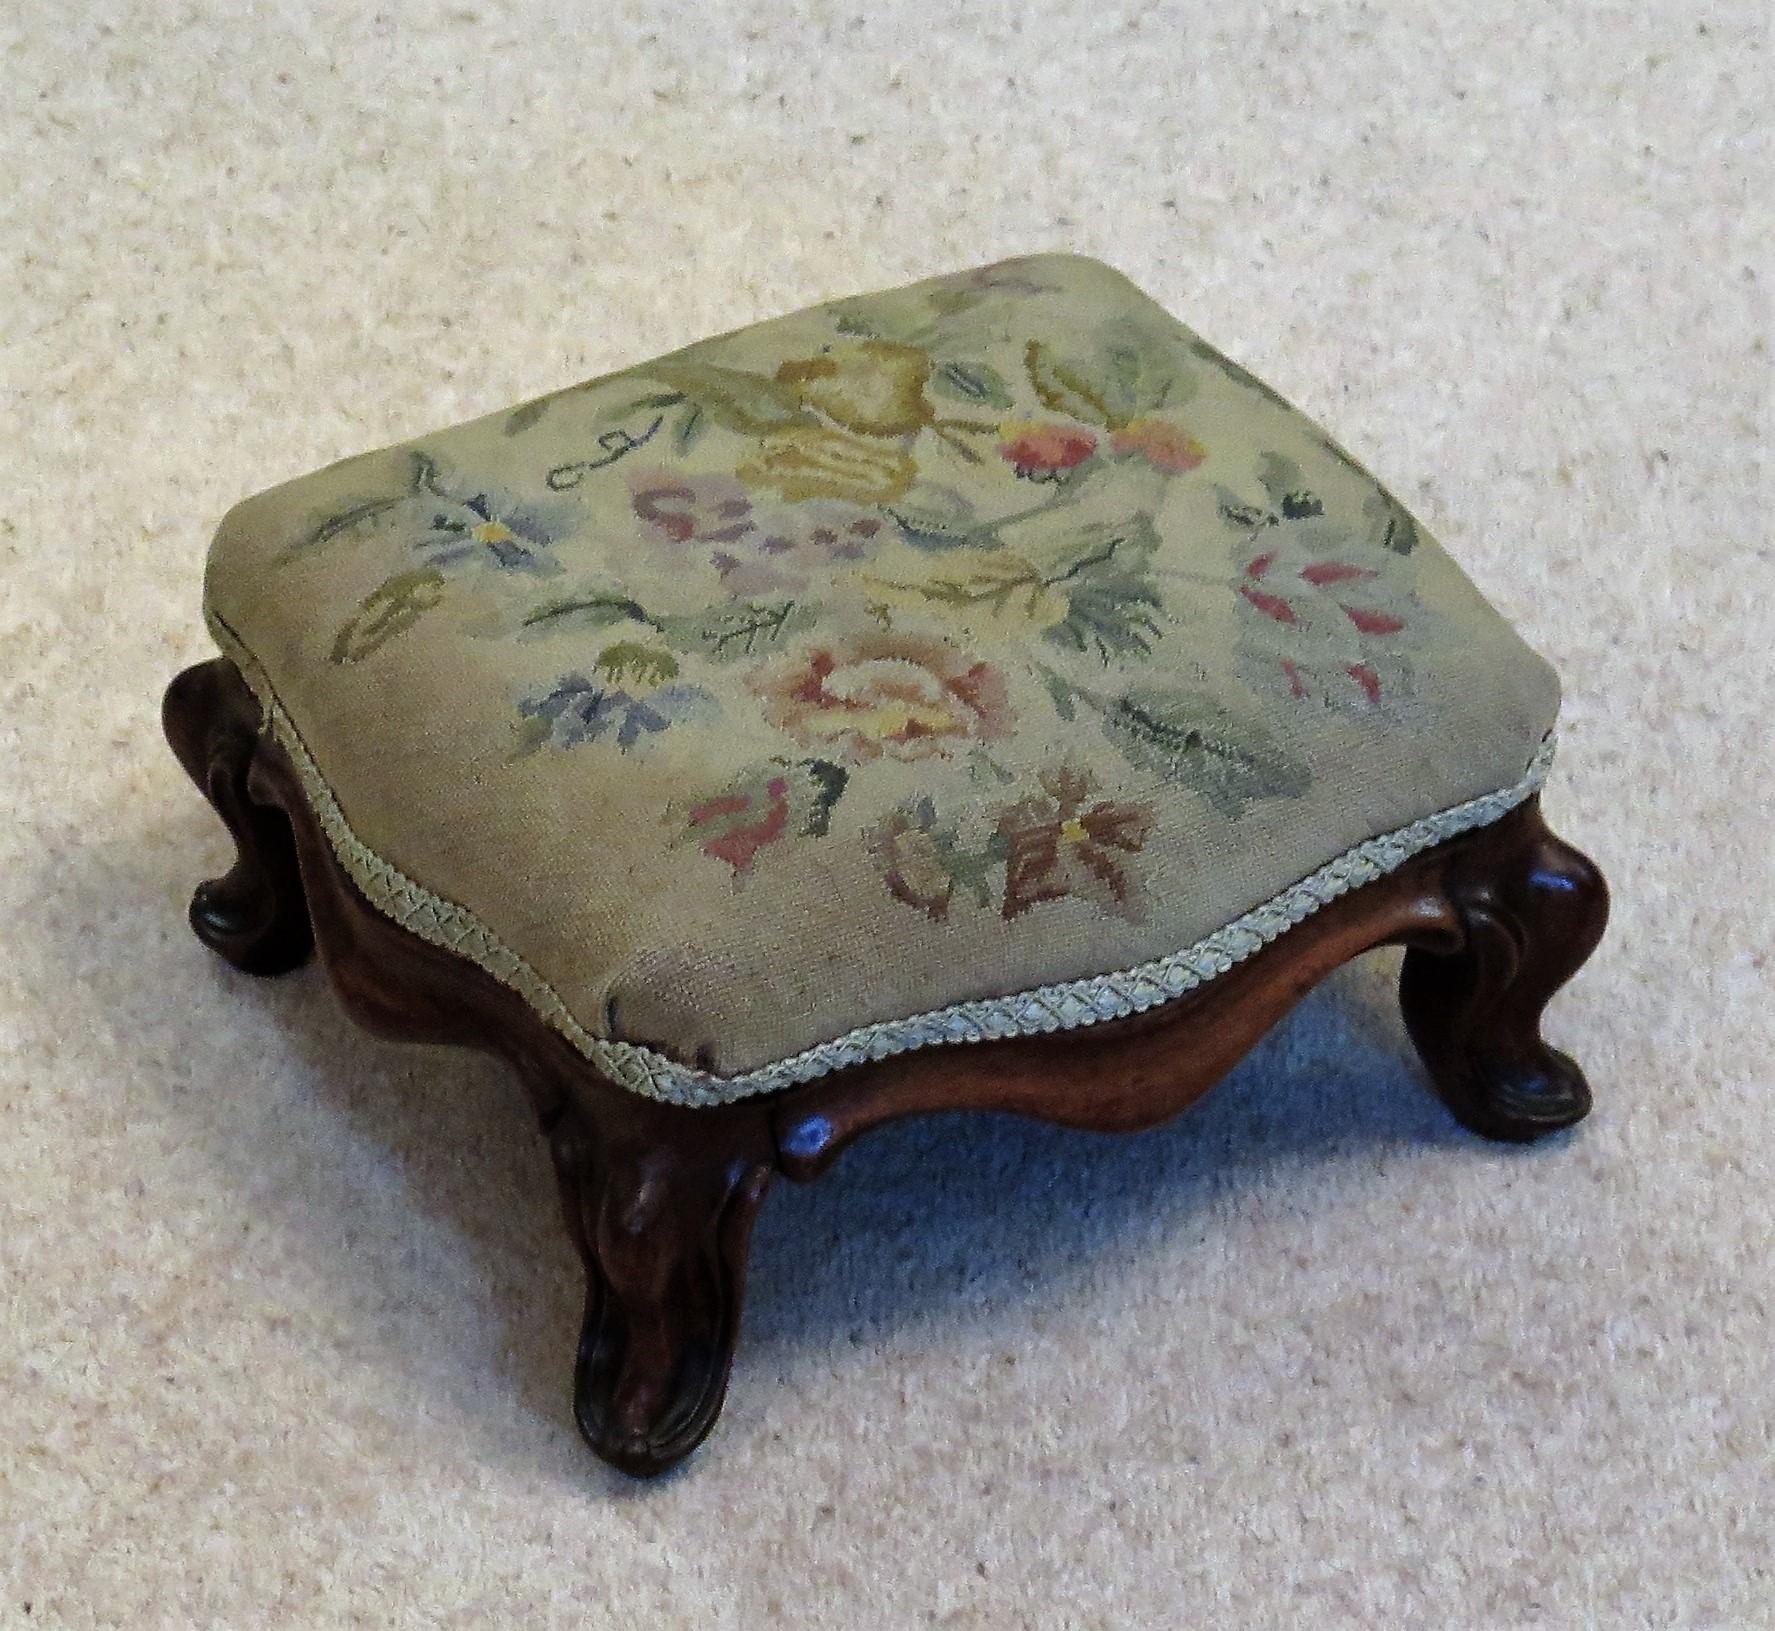 This is a very good quality English Victorian period, hardwood framed stool or foot stool with its original woven tapestry cover, circa 1850

The stool is rectangular in shape with a carved solid hardwood, possibly walnut, frame having curved and